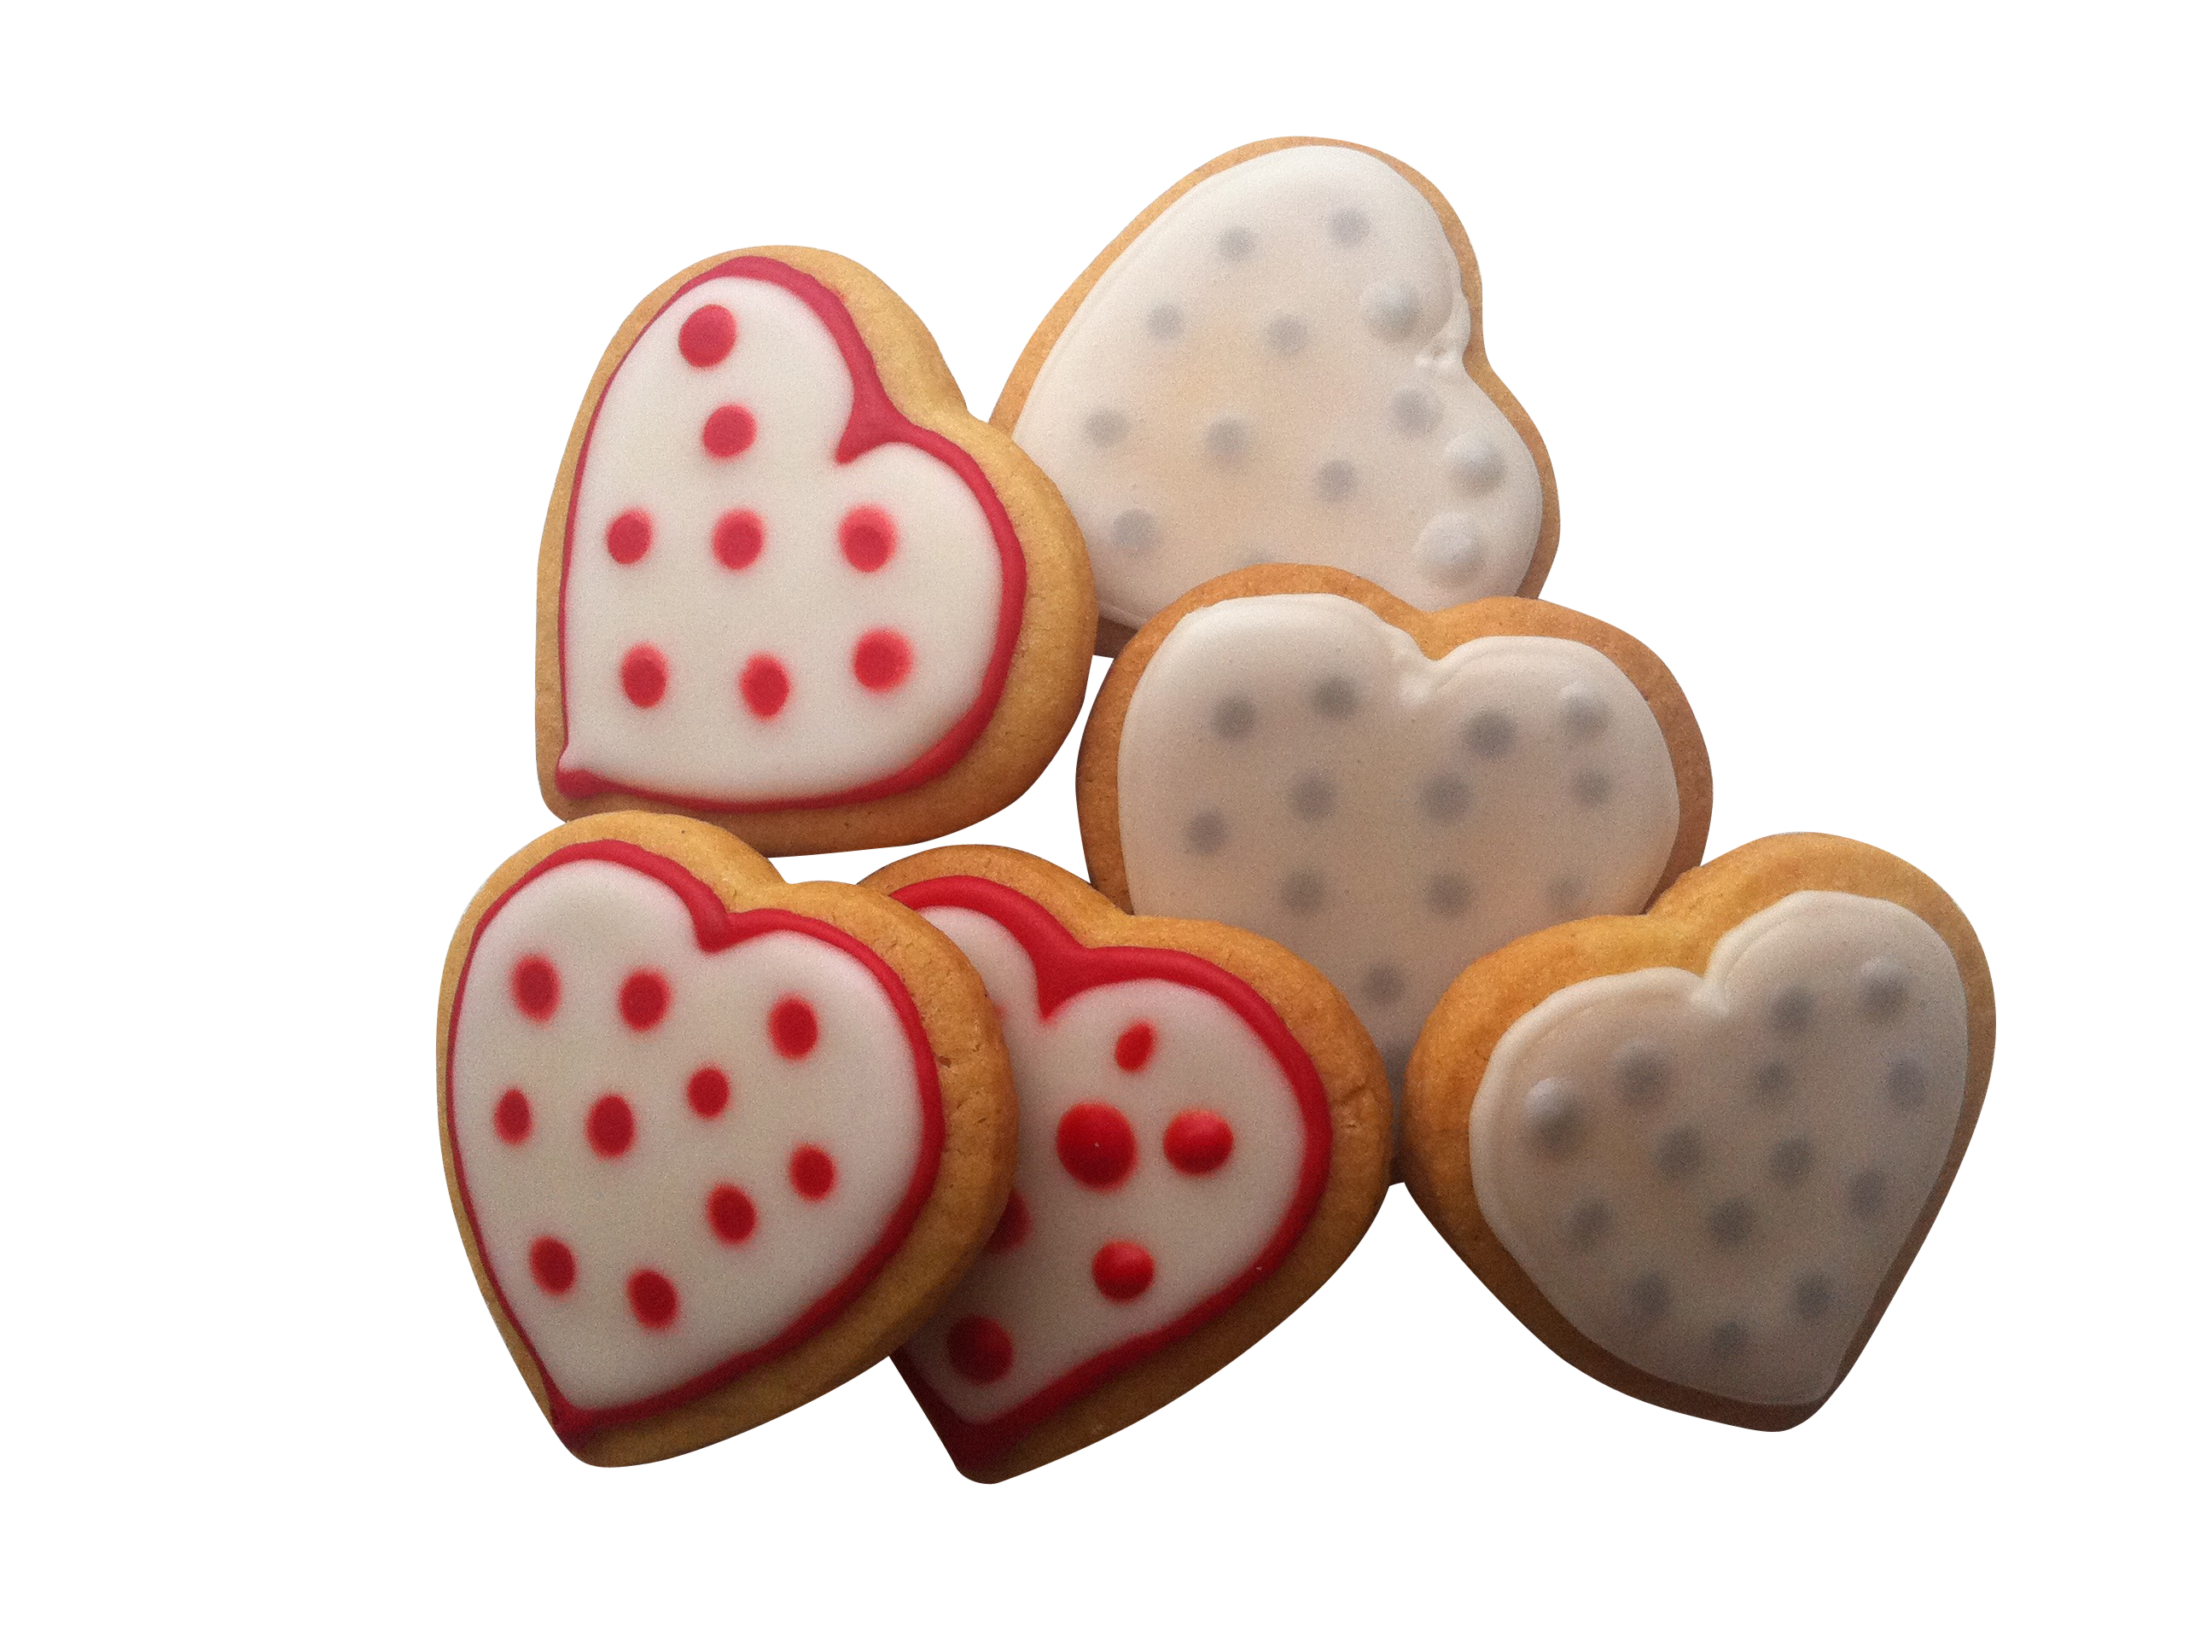 A Group Of Heart Shaped Cookies